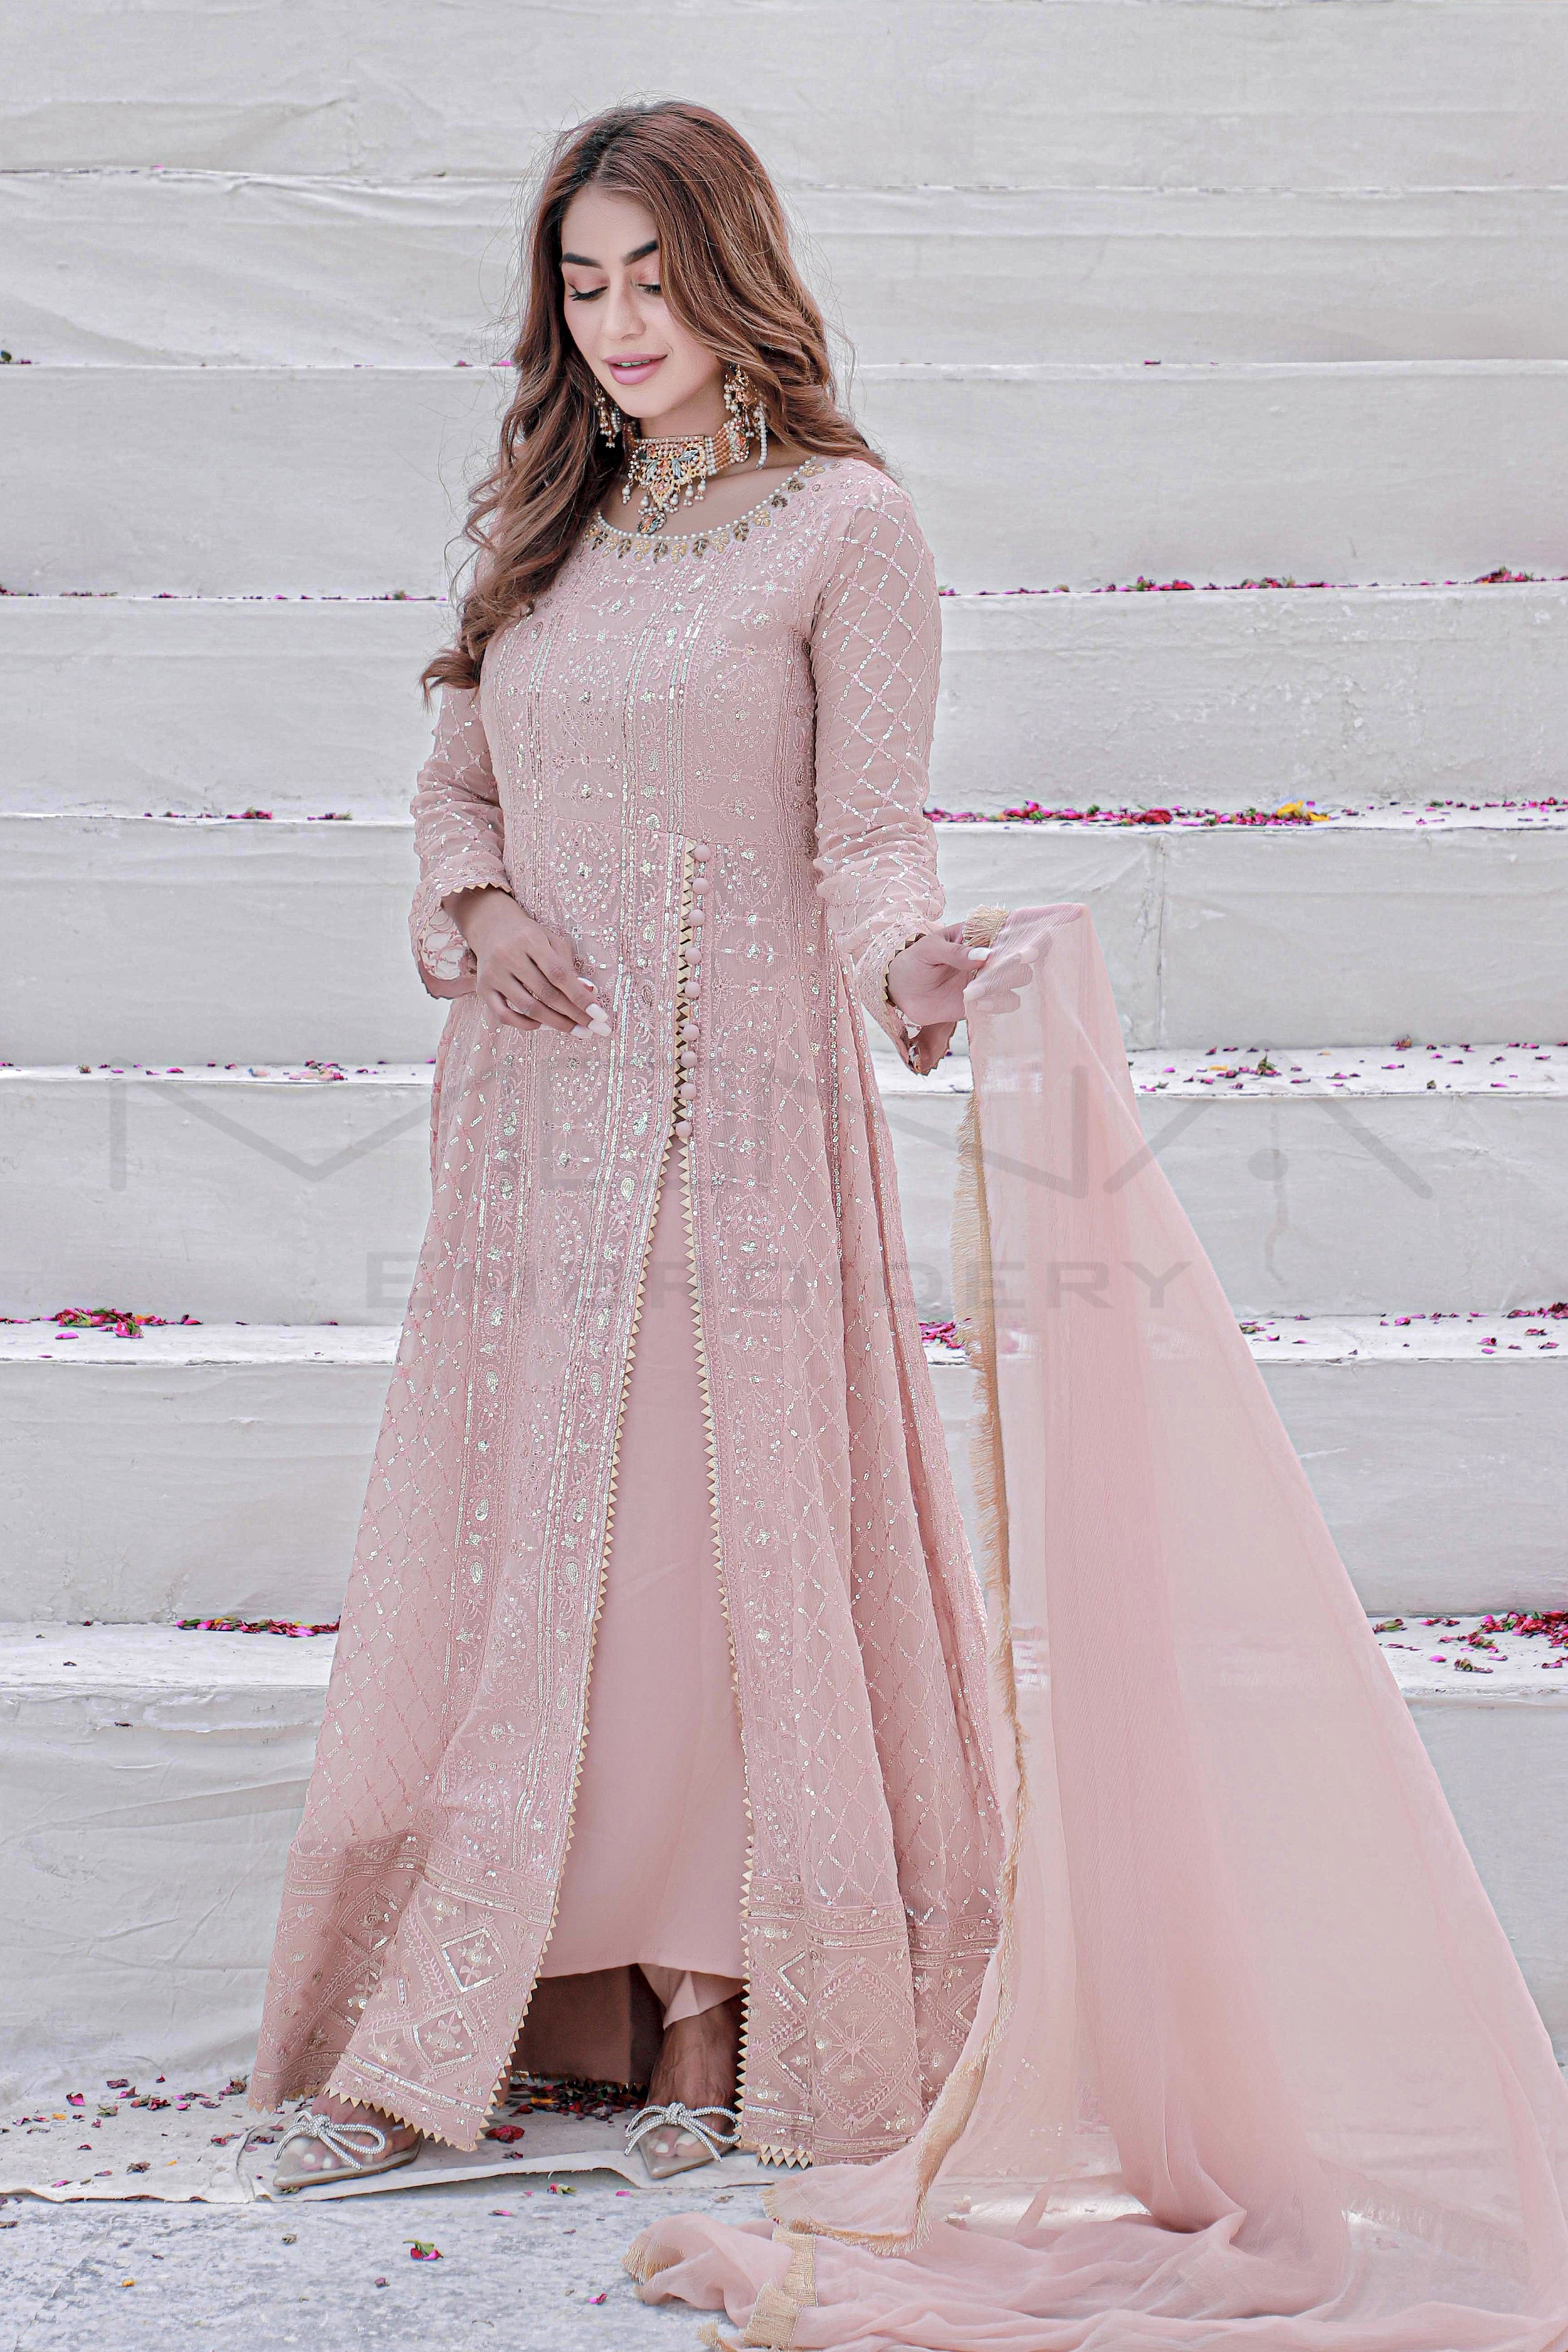 Hyderabad Wholesale Party Wear Original Pakistani Suits || Deeptex, Pranjul  Readymade Dress, Barbie Gowns | | Hyderabad Wholesale Party Wear Original Pakistani  Suits || Deeptex, Pranjul Readymade Dress, Barbie Gowns || ONLY